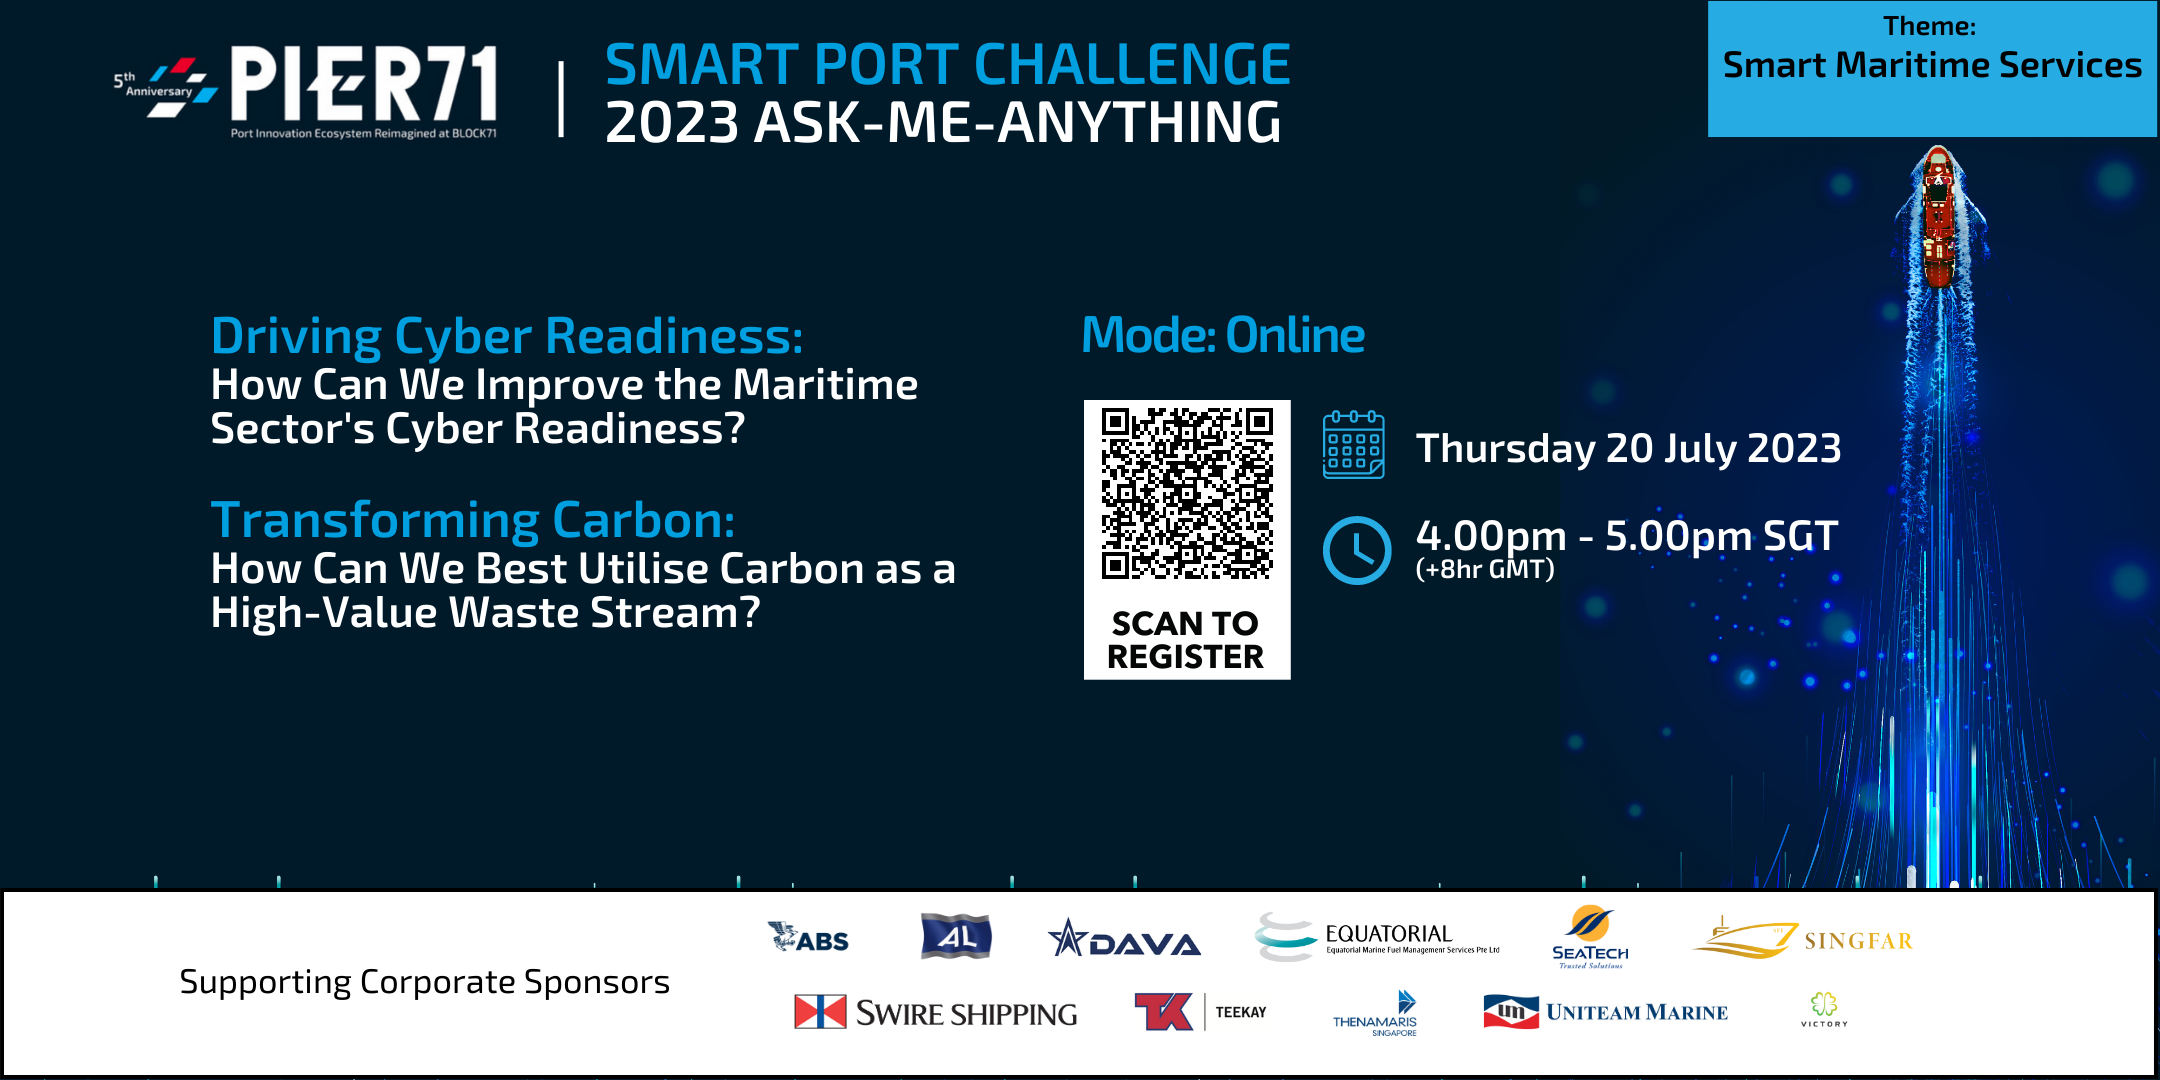 SPC2023 Ask-Me-Anything Session: Driving Cyber Readiness & Transforming Carbon